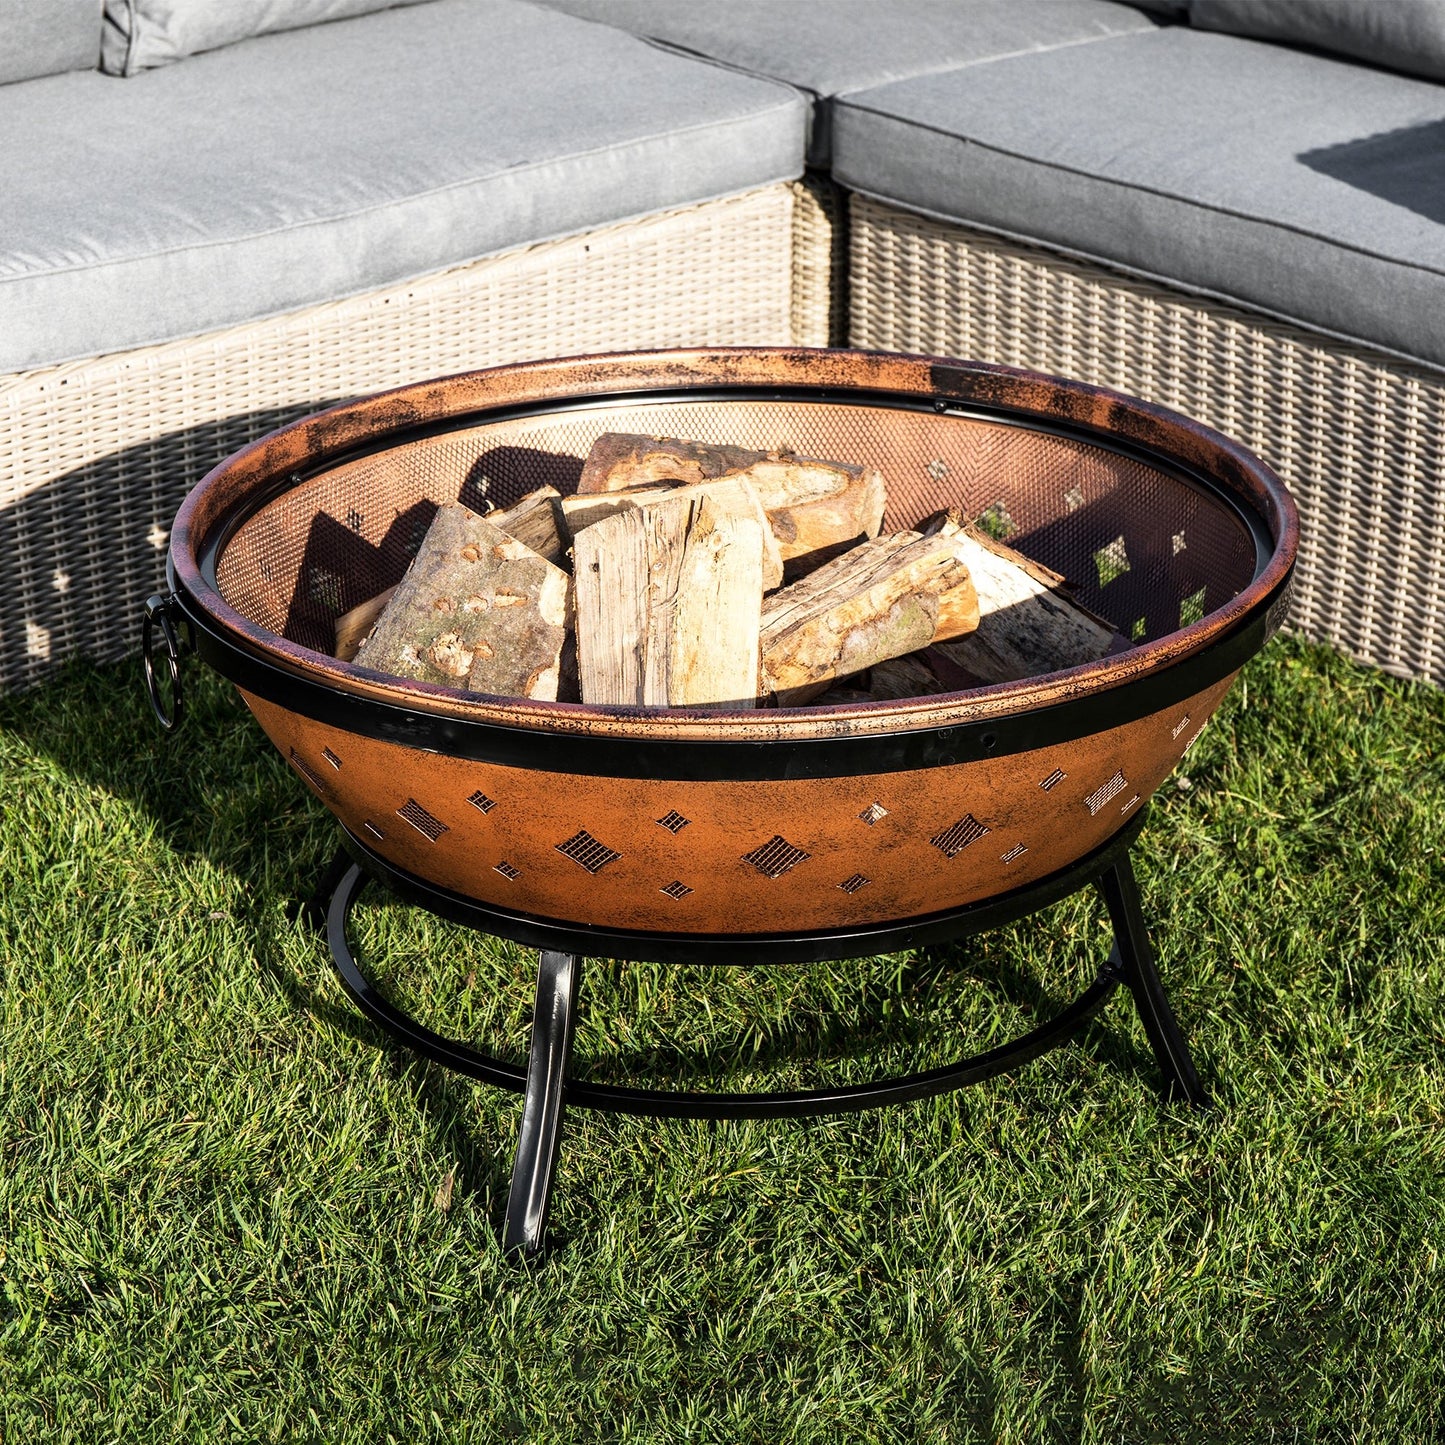 Teamson Home Wood Burning Fire Pit & Accessories - KXX